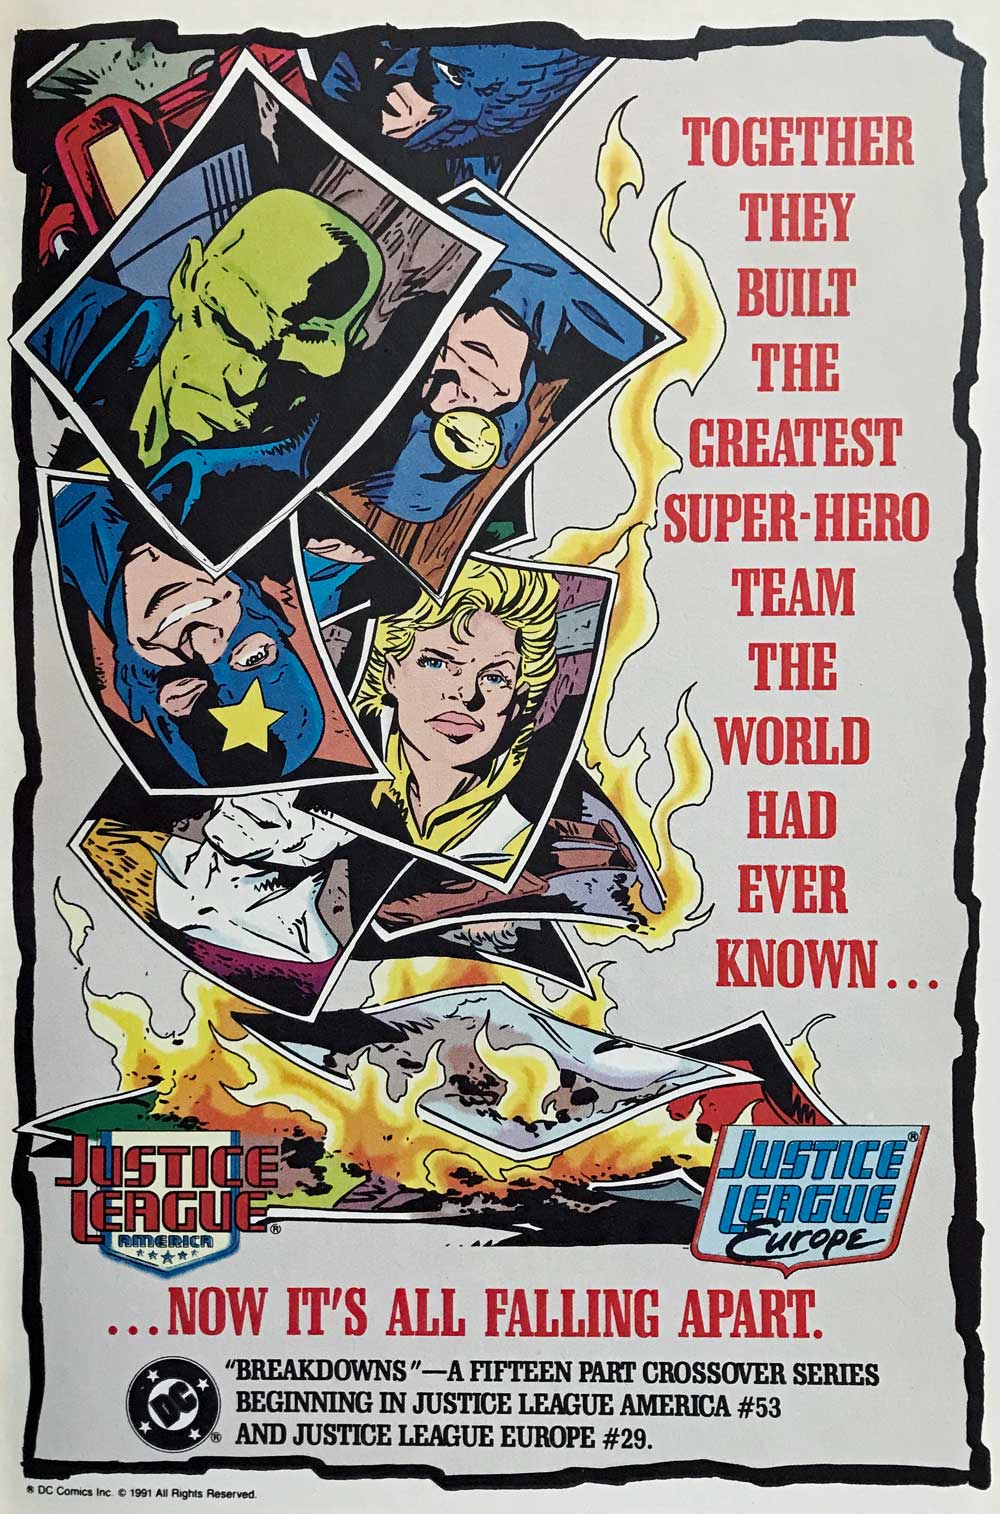 Justice League International Breakdowns advertisement by Keith Giffen